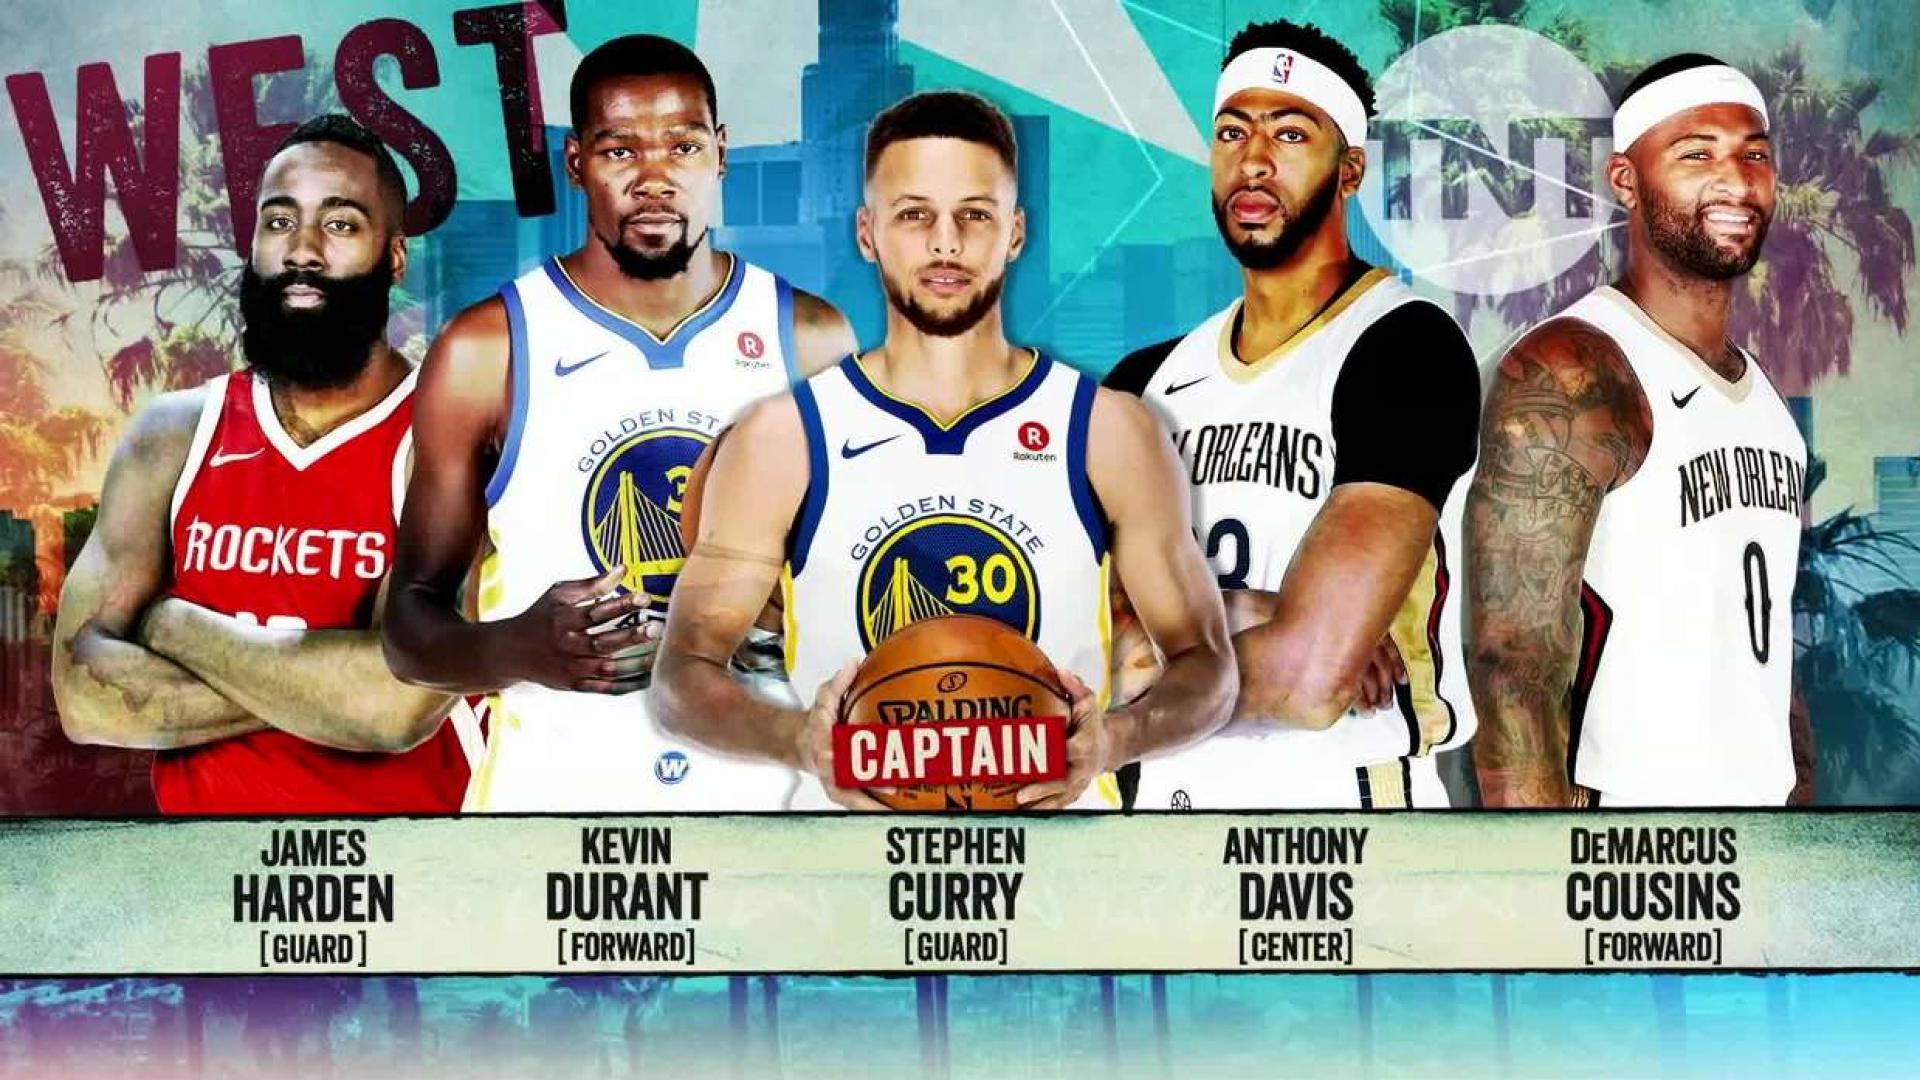 LeBron James, Steph Curry Named Captains As All Star Starters Are